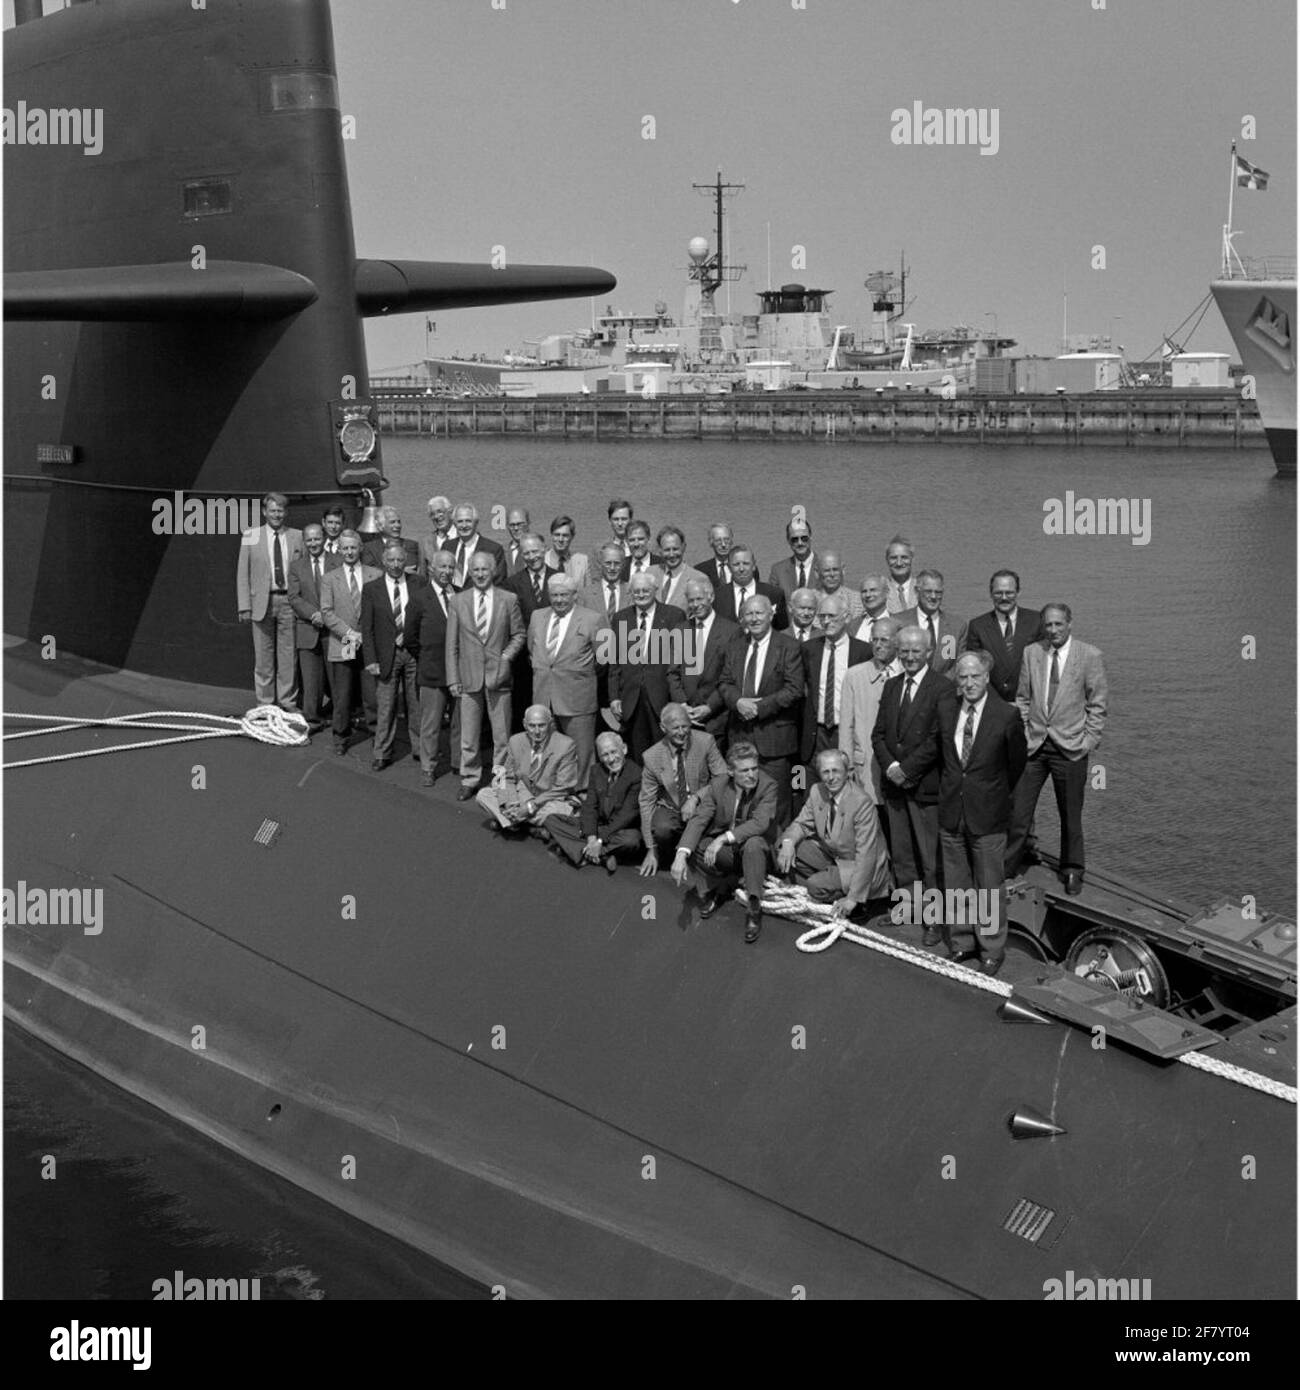 Reunion of the electrical engineering service officers (ED) of the 'old' submarine Hr.Ms. Sea lion (1953-1969) collected on the deck of the 'new' submarine Hr.Ms. Sea lion (1990) in May 1990. In the background lies the Belgian frigate BNS Westdiep (F 911,1978) from the Wielingsmaatschap. Stock Photo